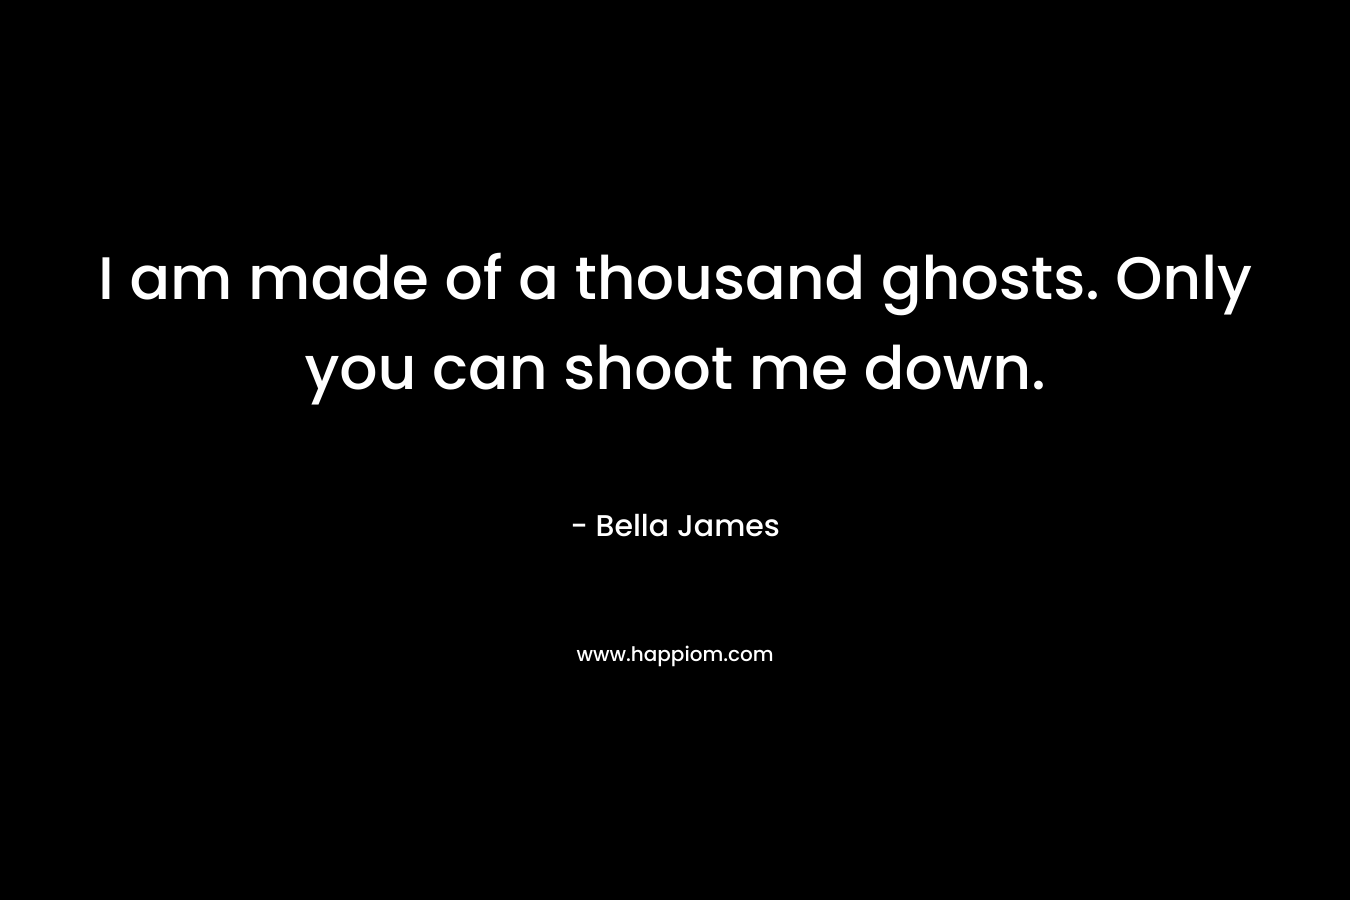 I am made of a thousand ghosts. Only you can shoot me down. – Bella James